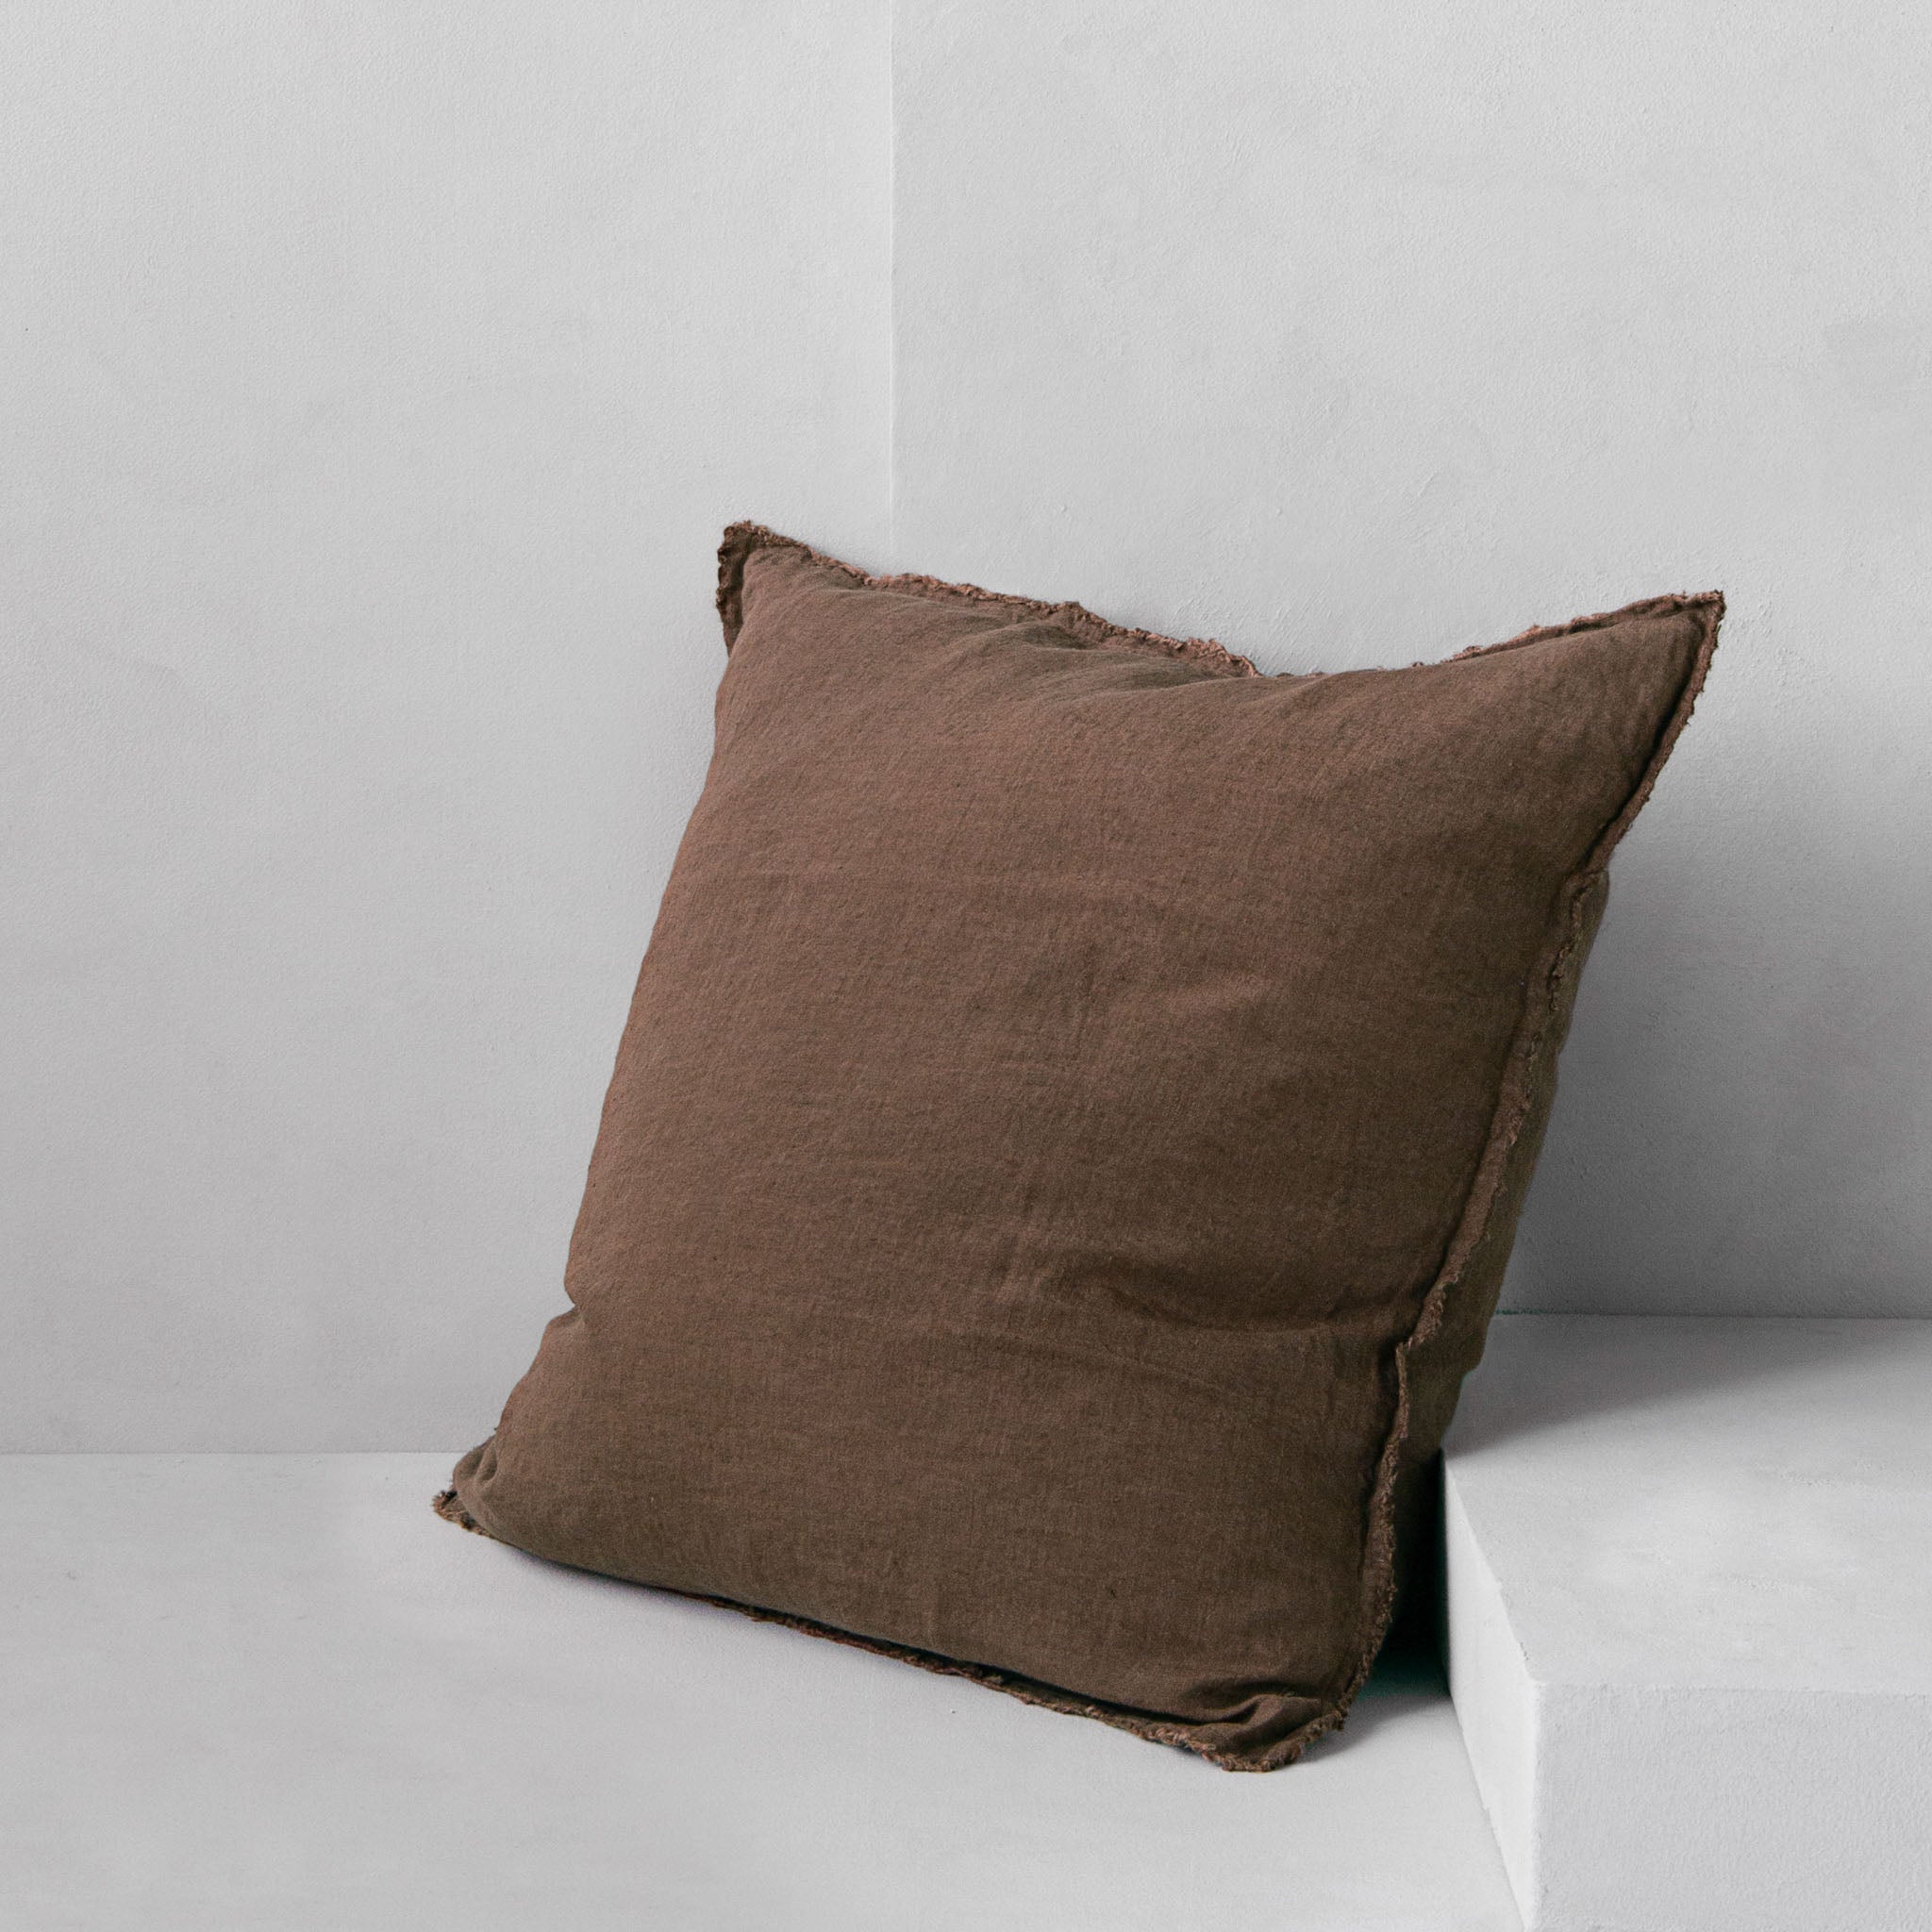 Linen Cushion & Cover | Chocolate Brown | Hale Mercantile Co.